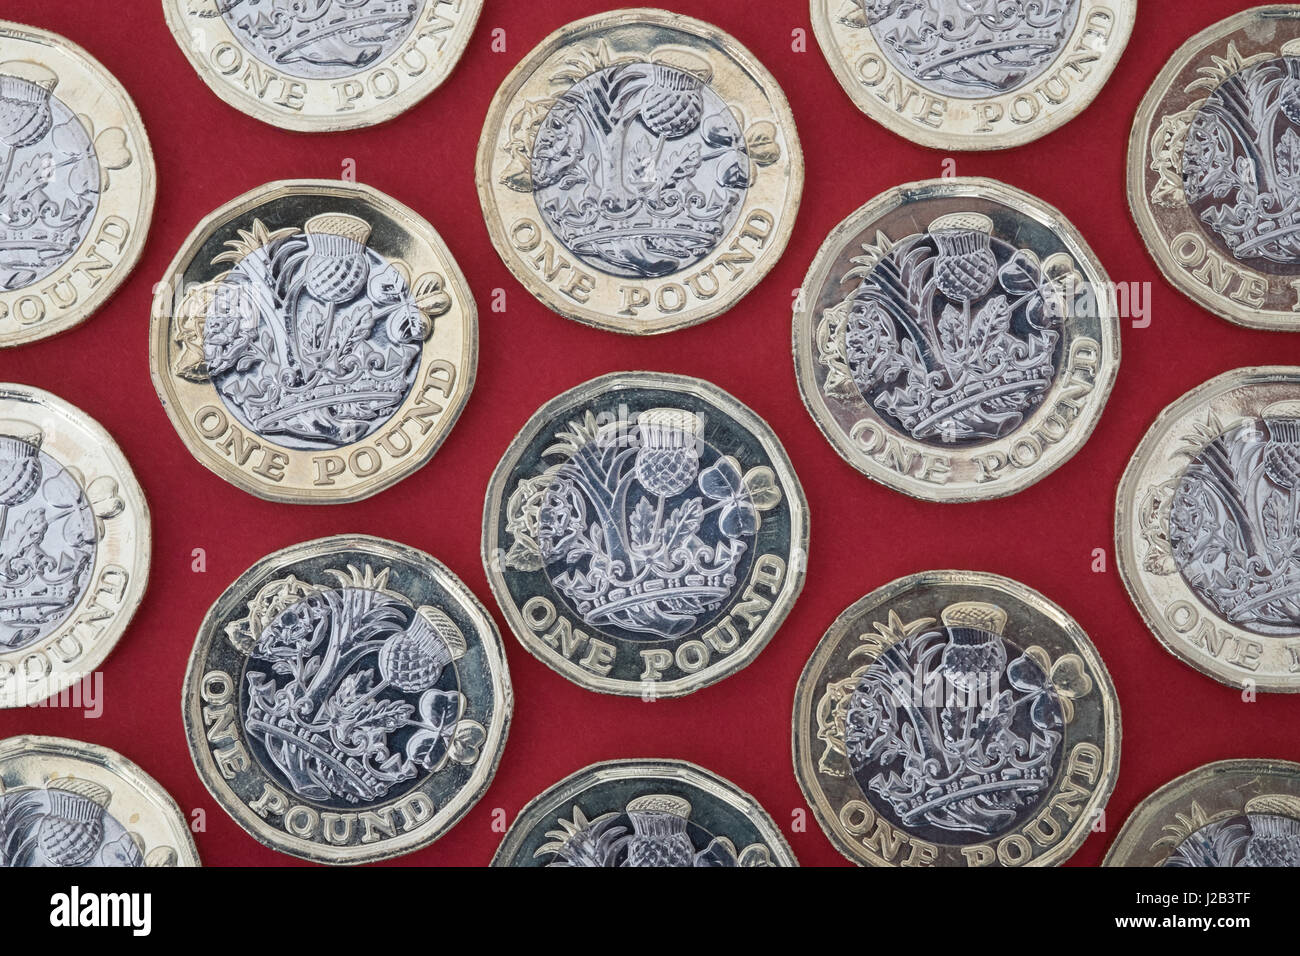 UK new pound coins on red background Stock Photo